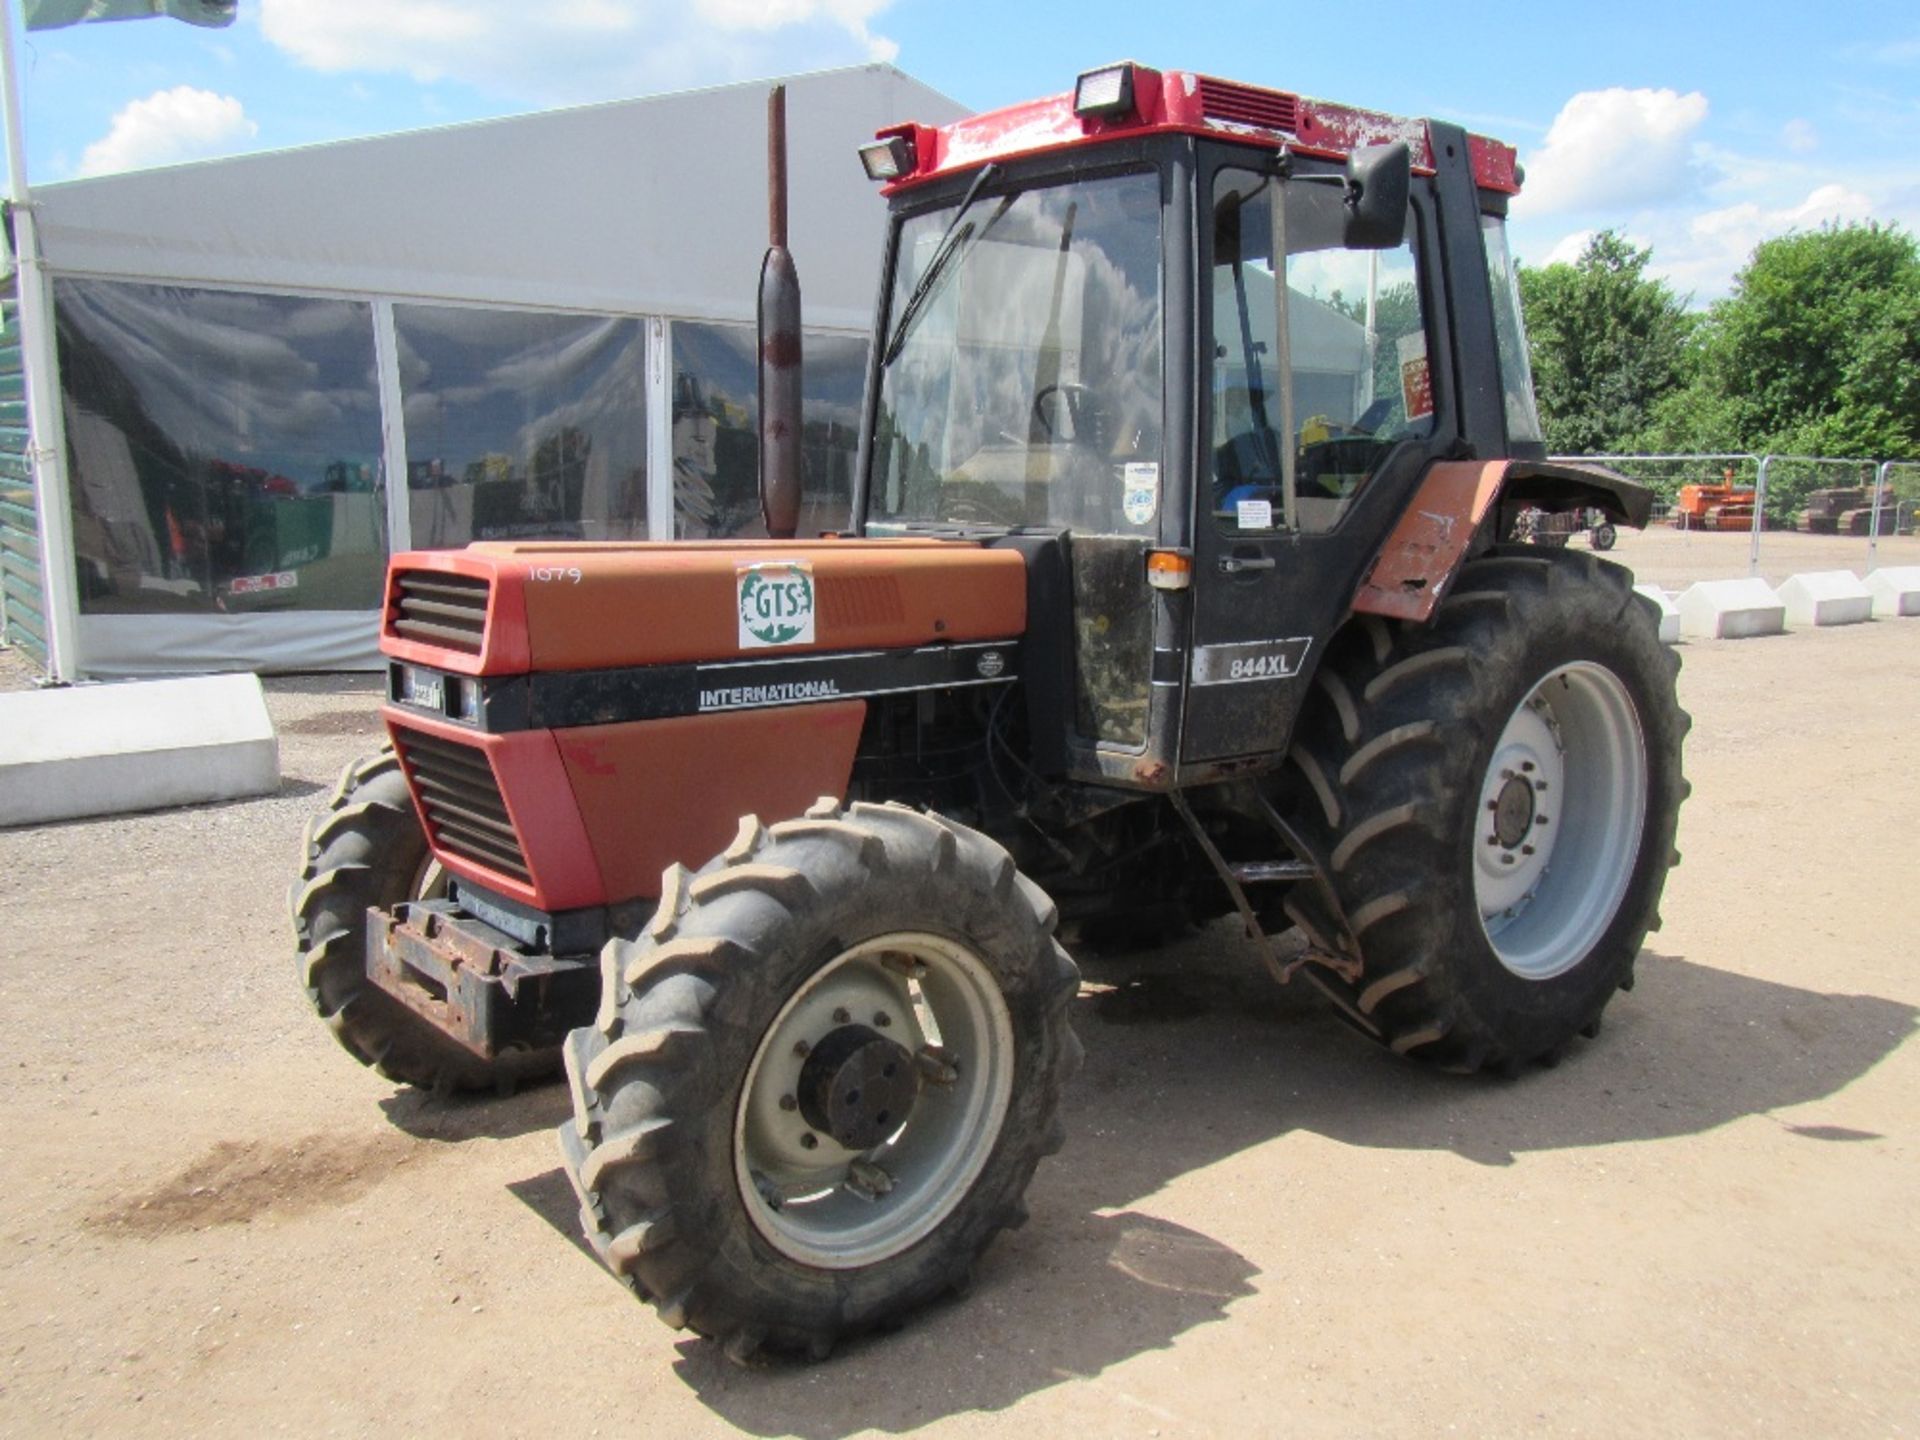 Case 844XL 4wd Tractor c/w V5 Reg. No. H734 BEG Hours: 7,275